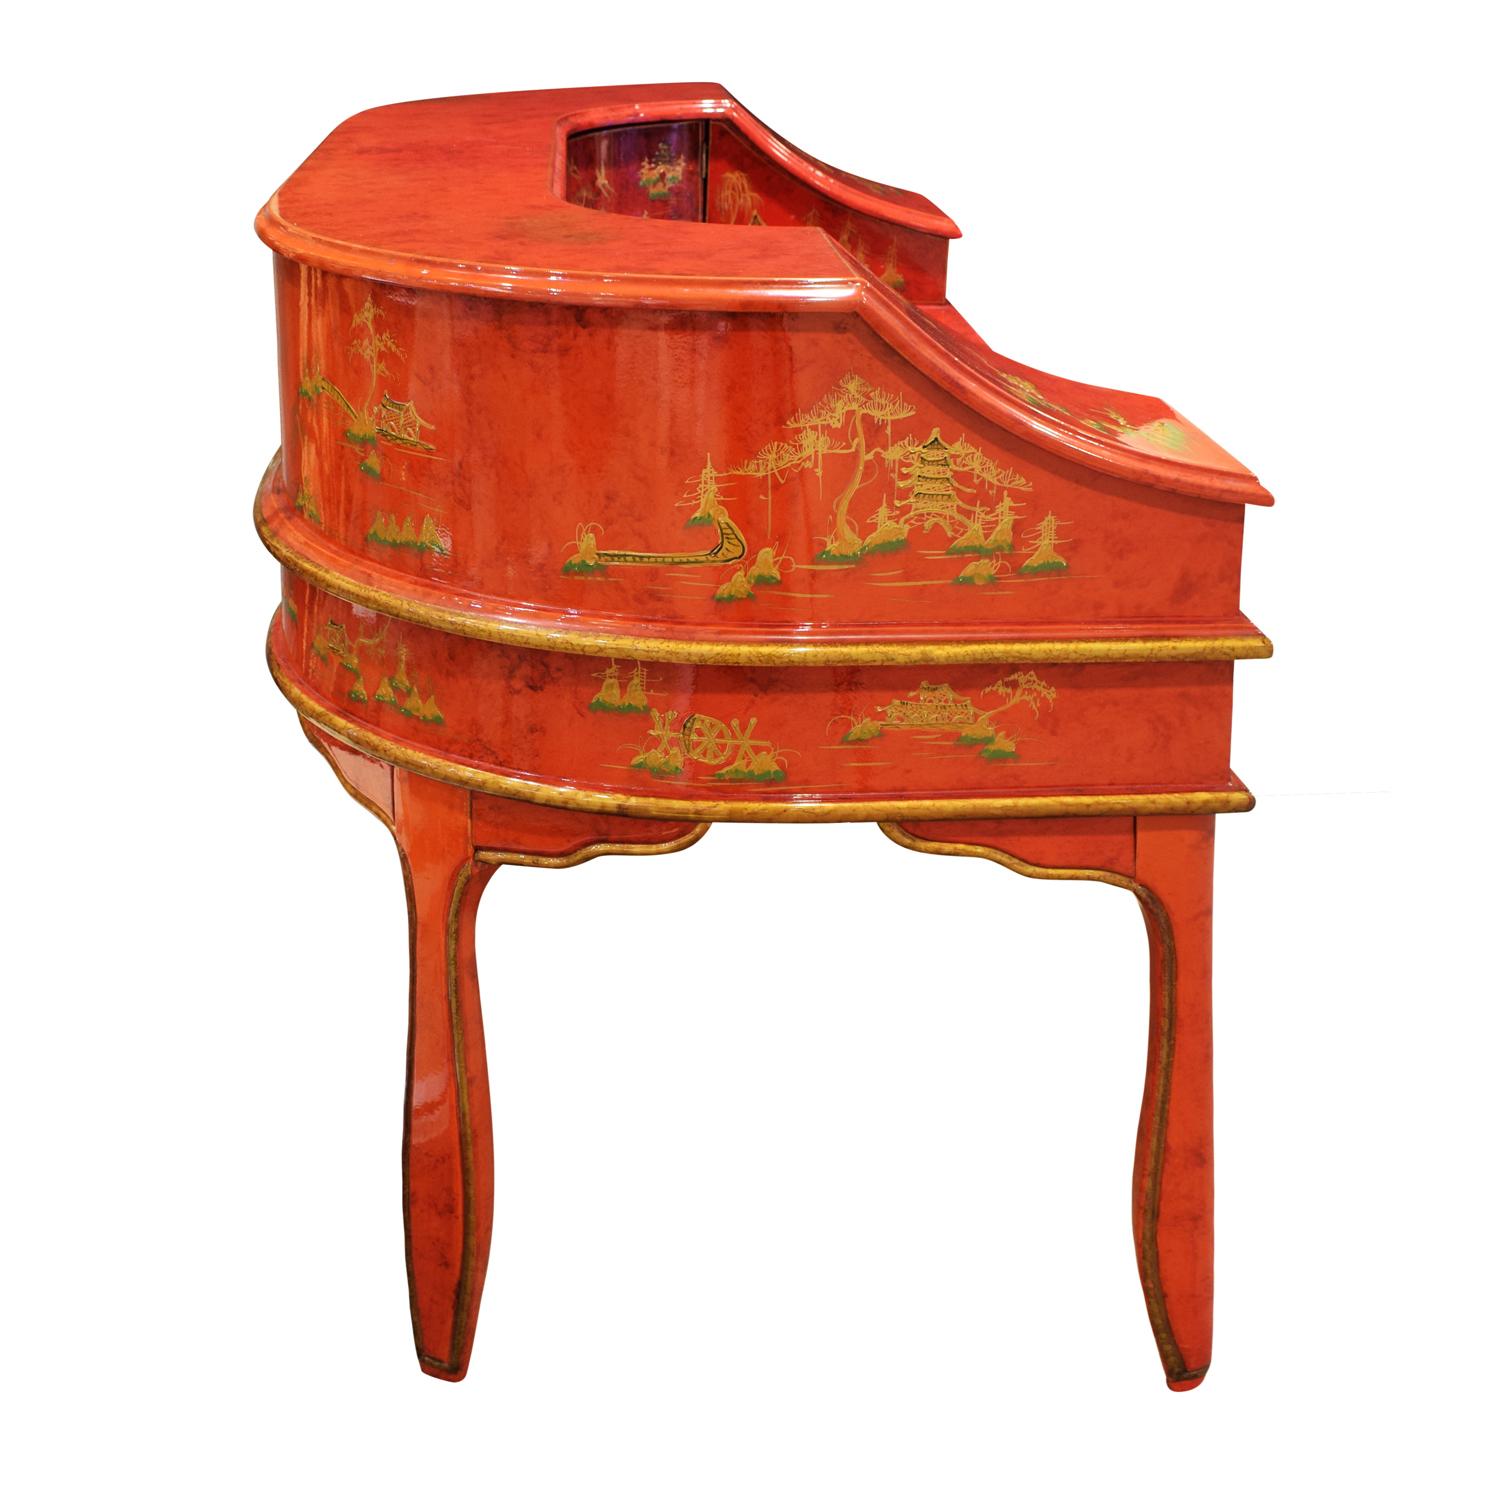 Highly decorated desk in red lacquer with stacked drawers and painted scenes, Chinese, 1950's.